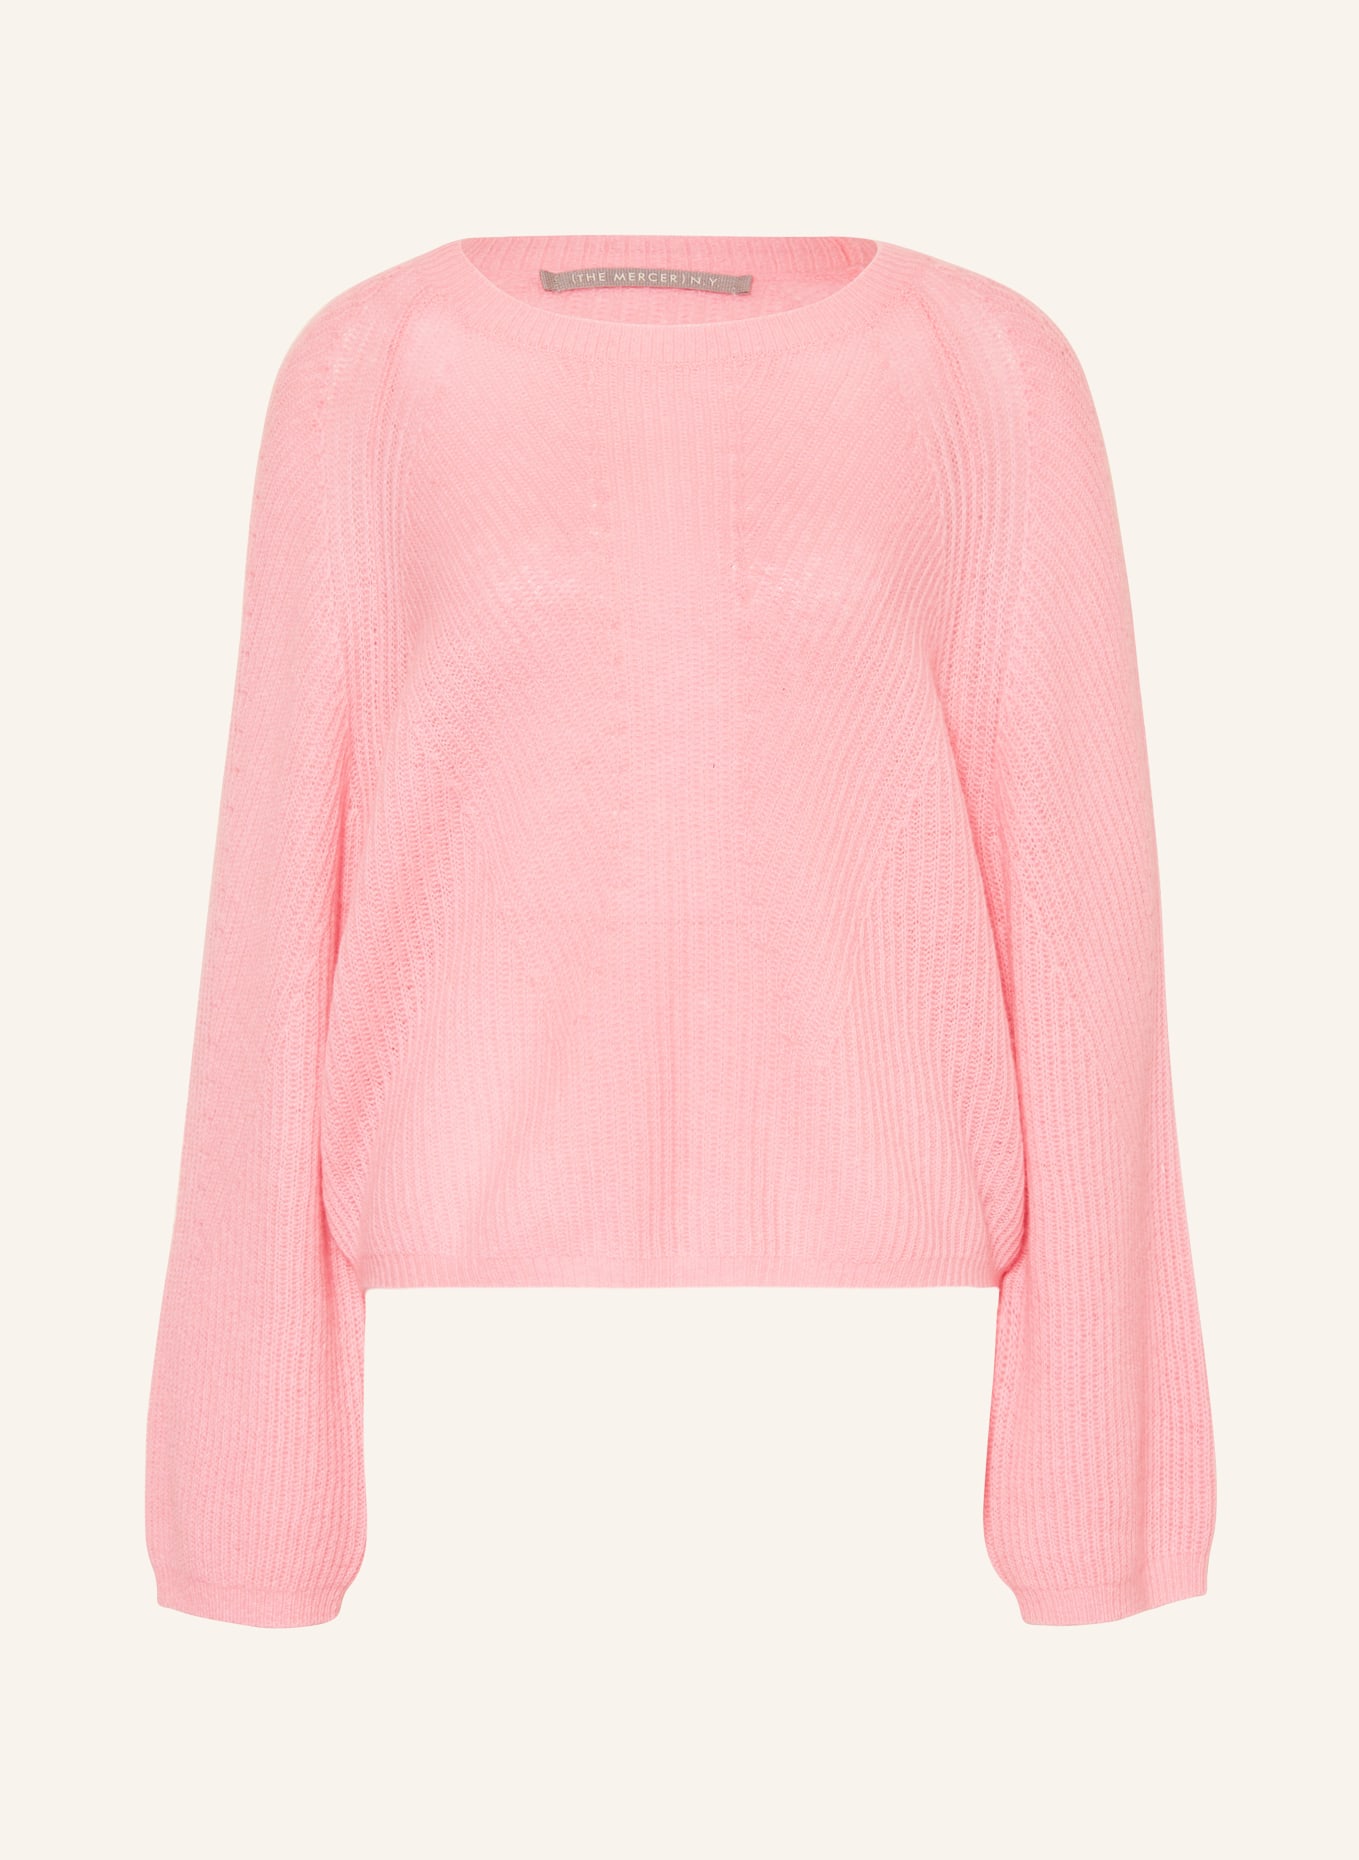 (THE MERCER) N.Y. Cashmere sweater, Color: PINK (Image 1)